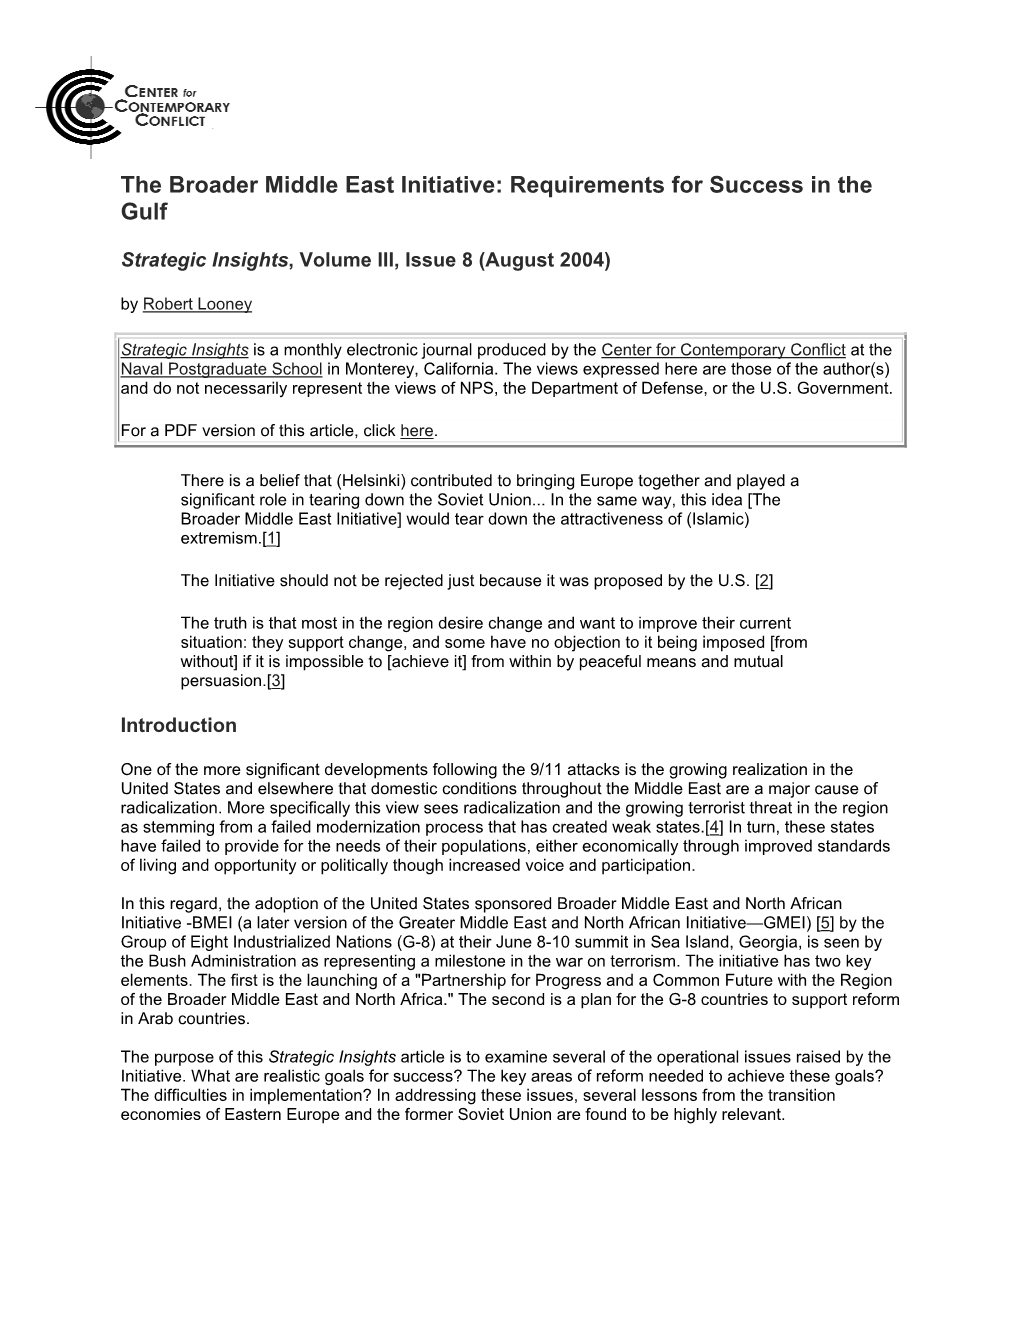 The Broader Middle East Initiative: Requirements for Success in the Gulf